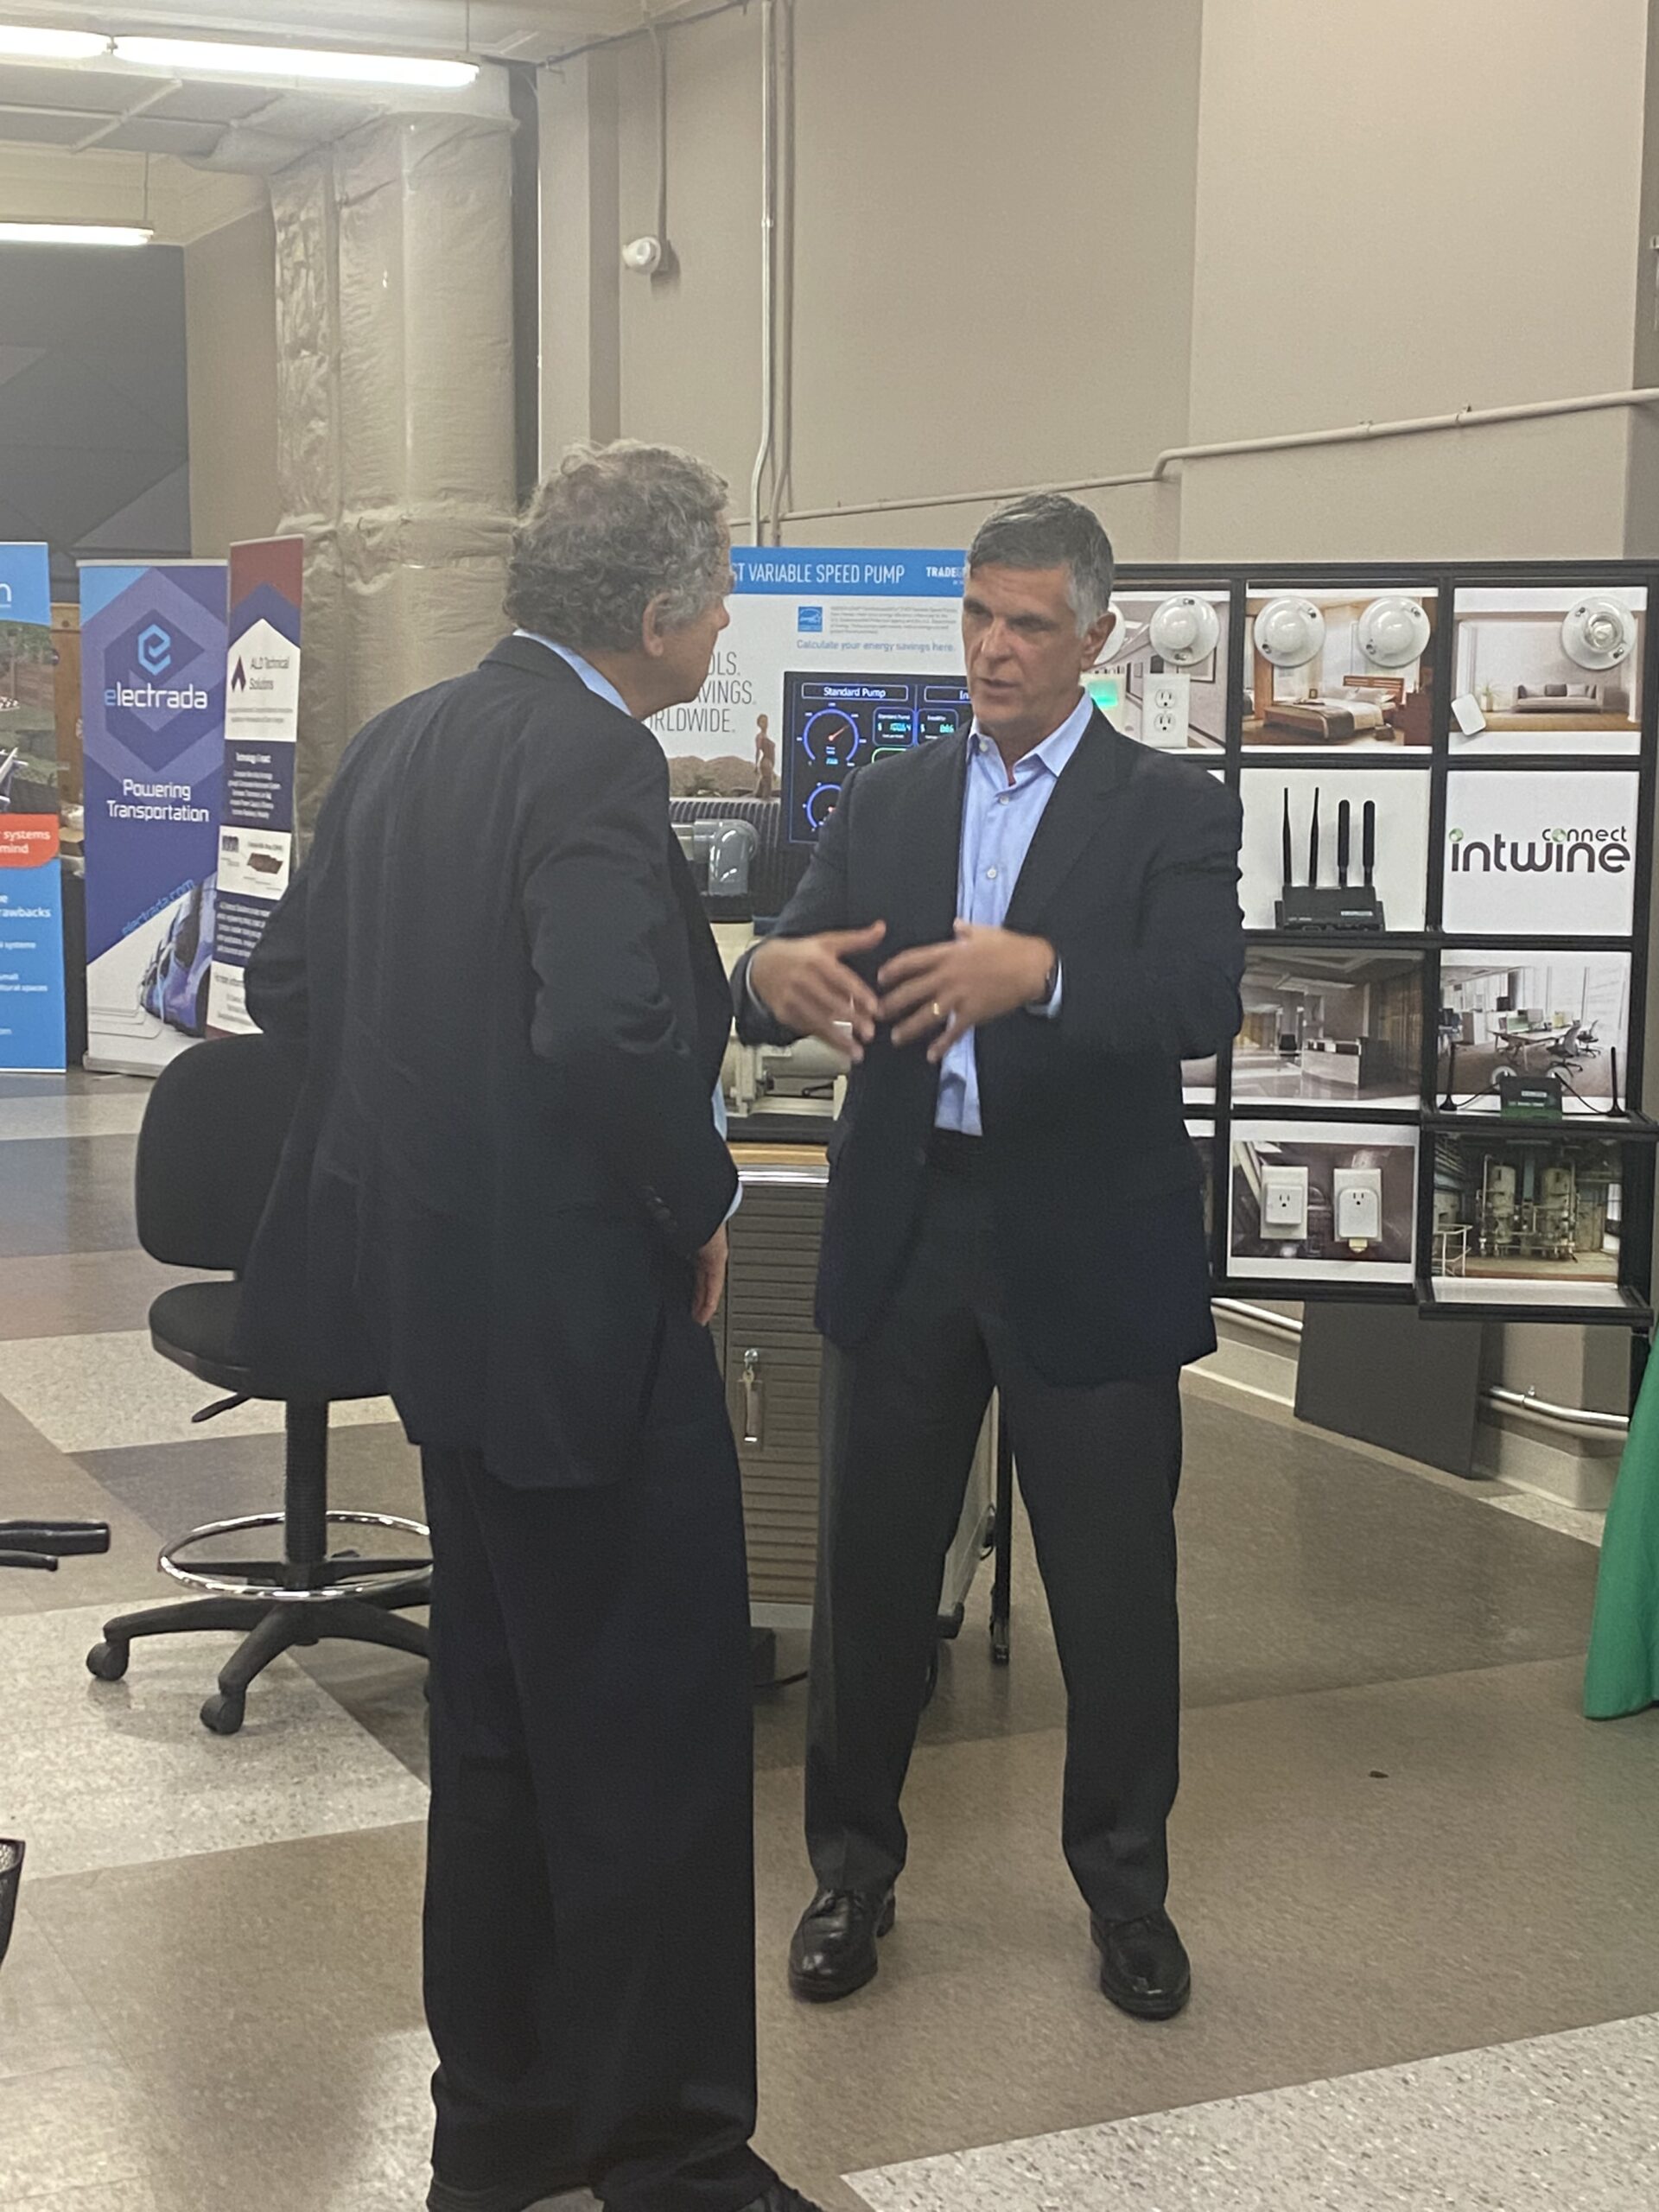 Senator Sherrod Brown discussing startup technology with a BRITE member company